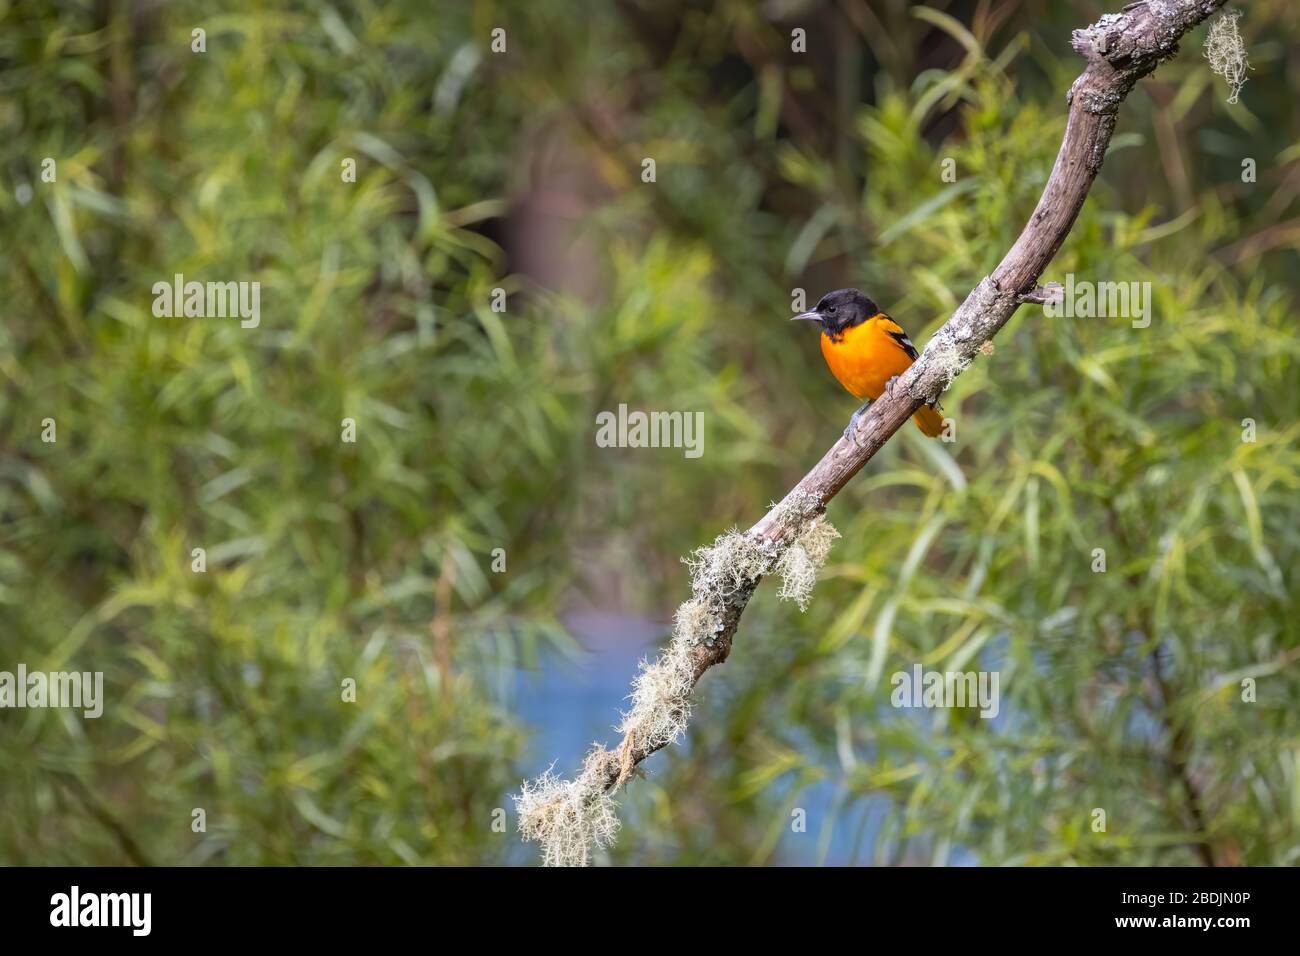 An adult male Baltimore Oriole (Icterus galbula) perched on a branch in the cloud forest of Costa Rica near San Gerardo de Dota. Stock Photo